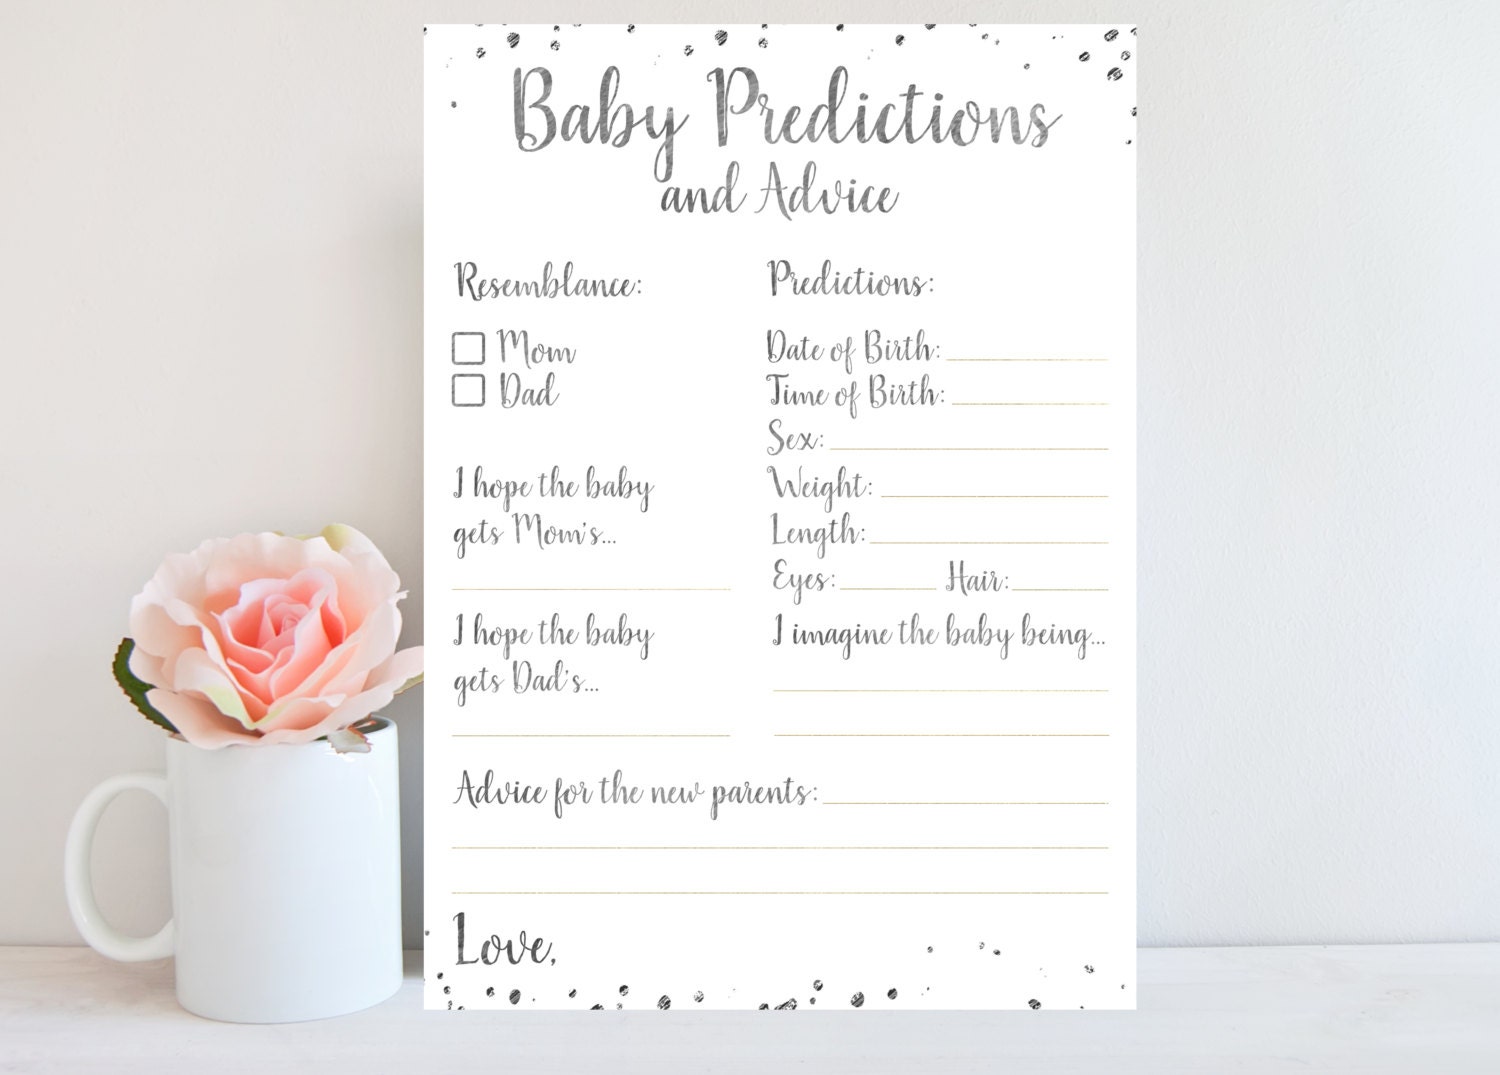 baby-shower-predictions-card-silver-confetti-baby